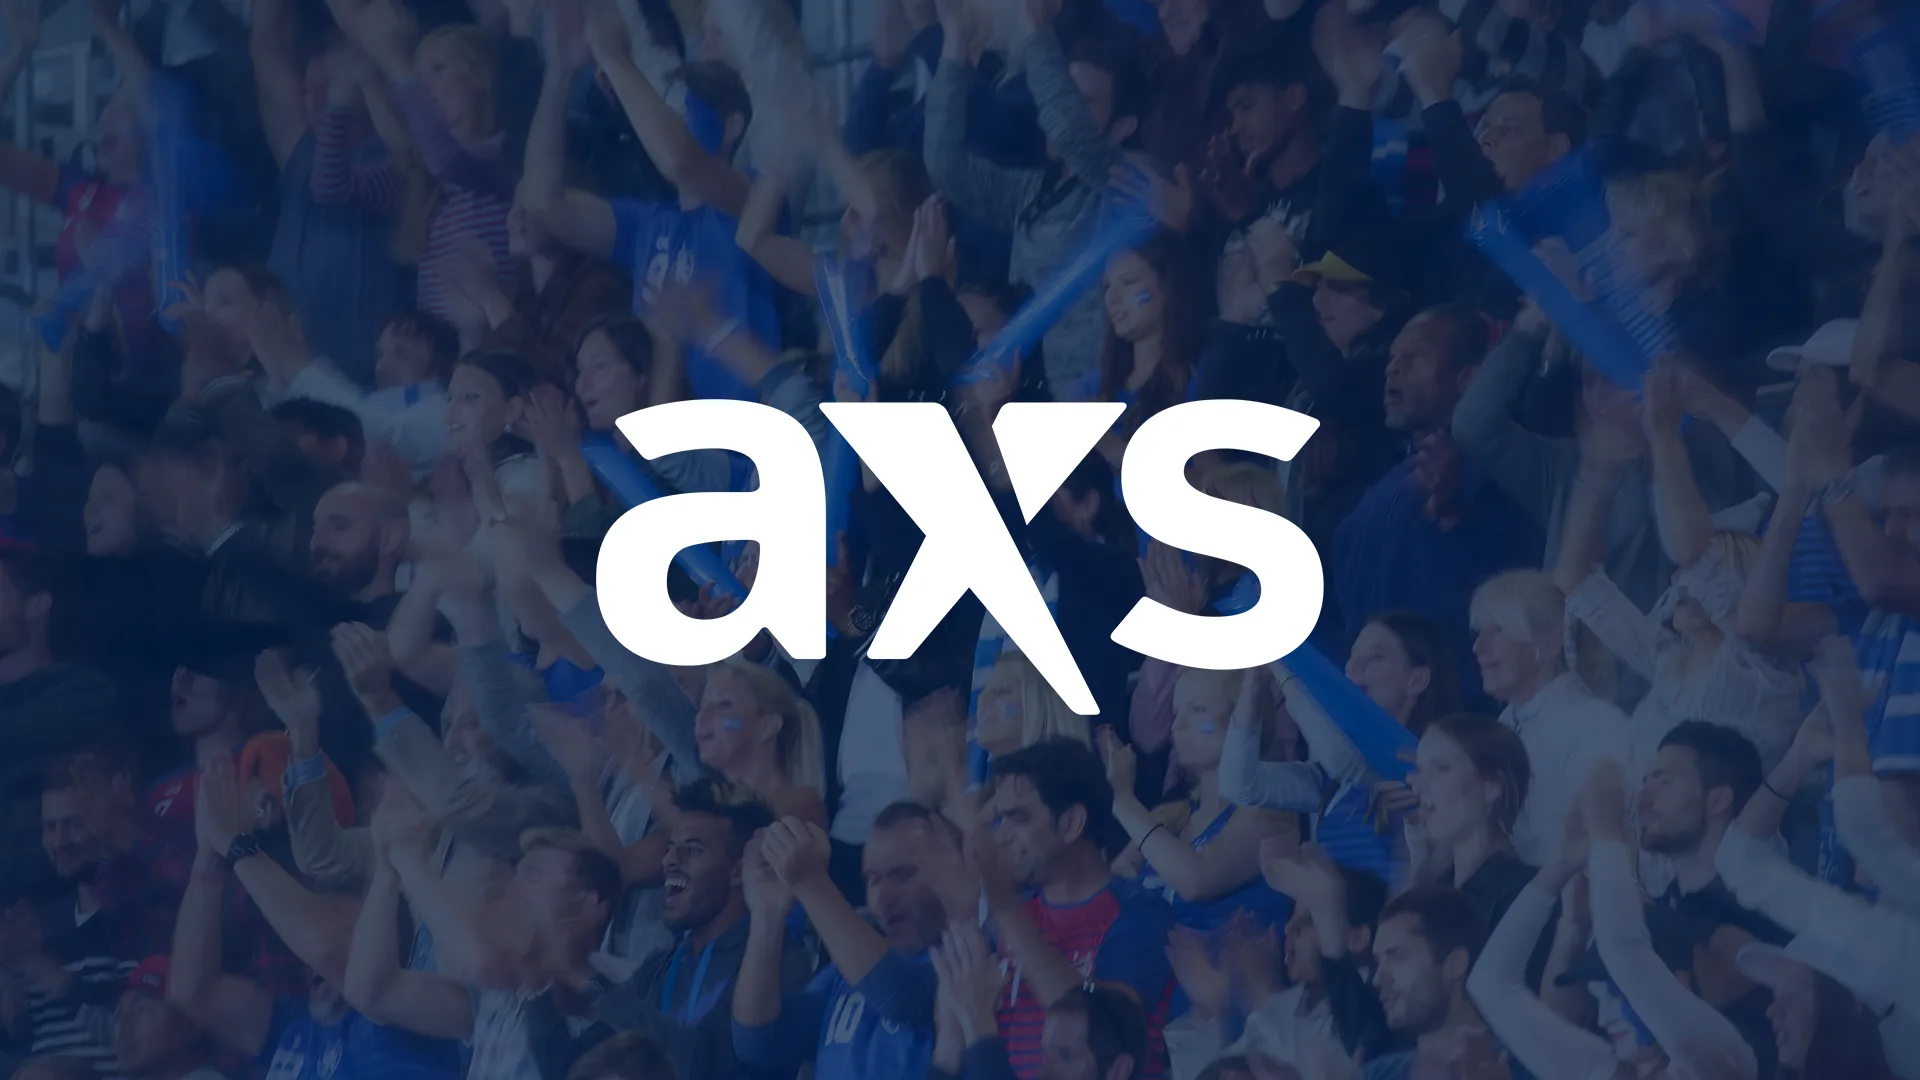 AXS logo over background photo of sporting event crowd